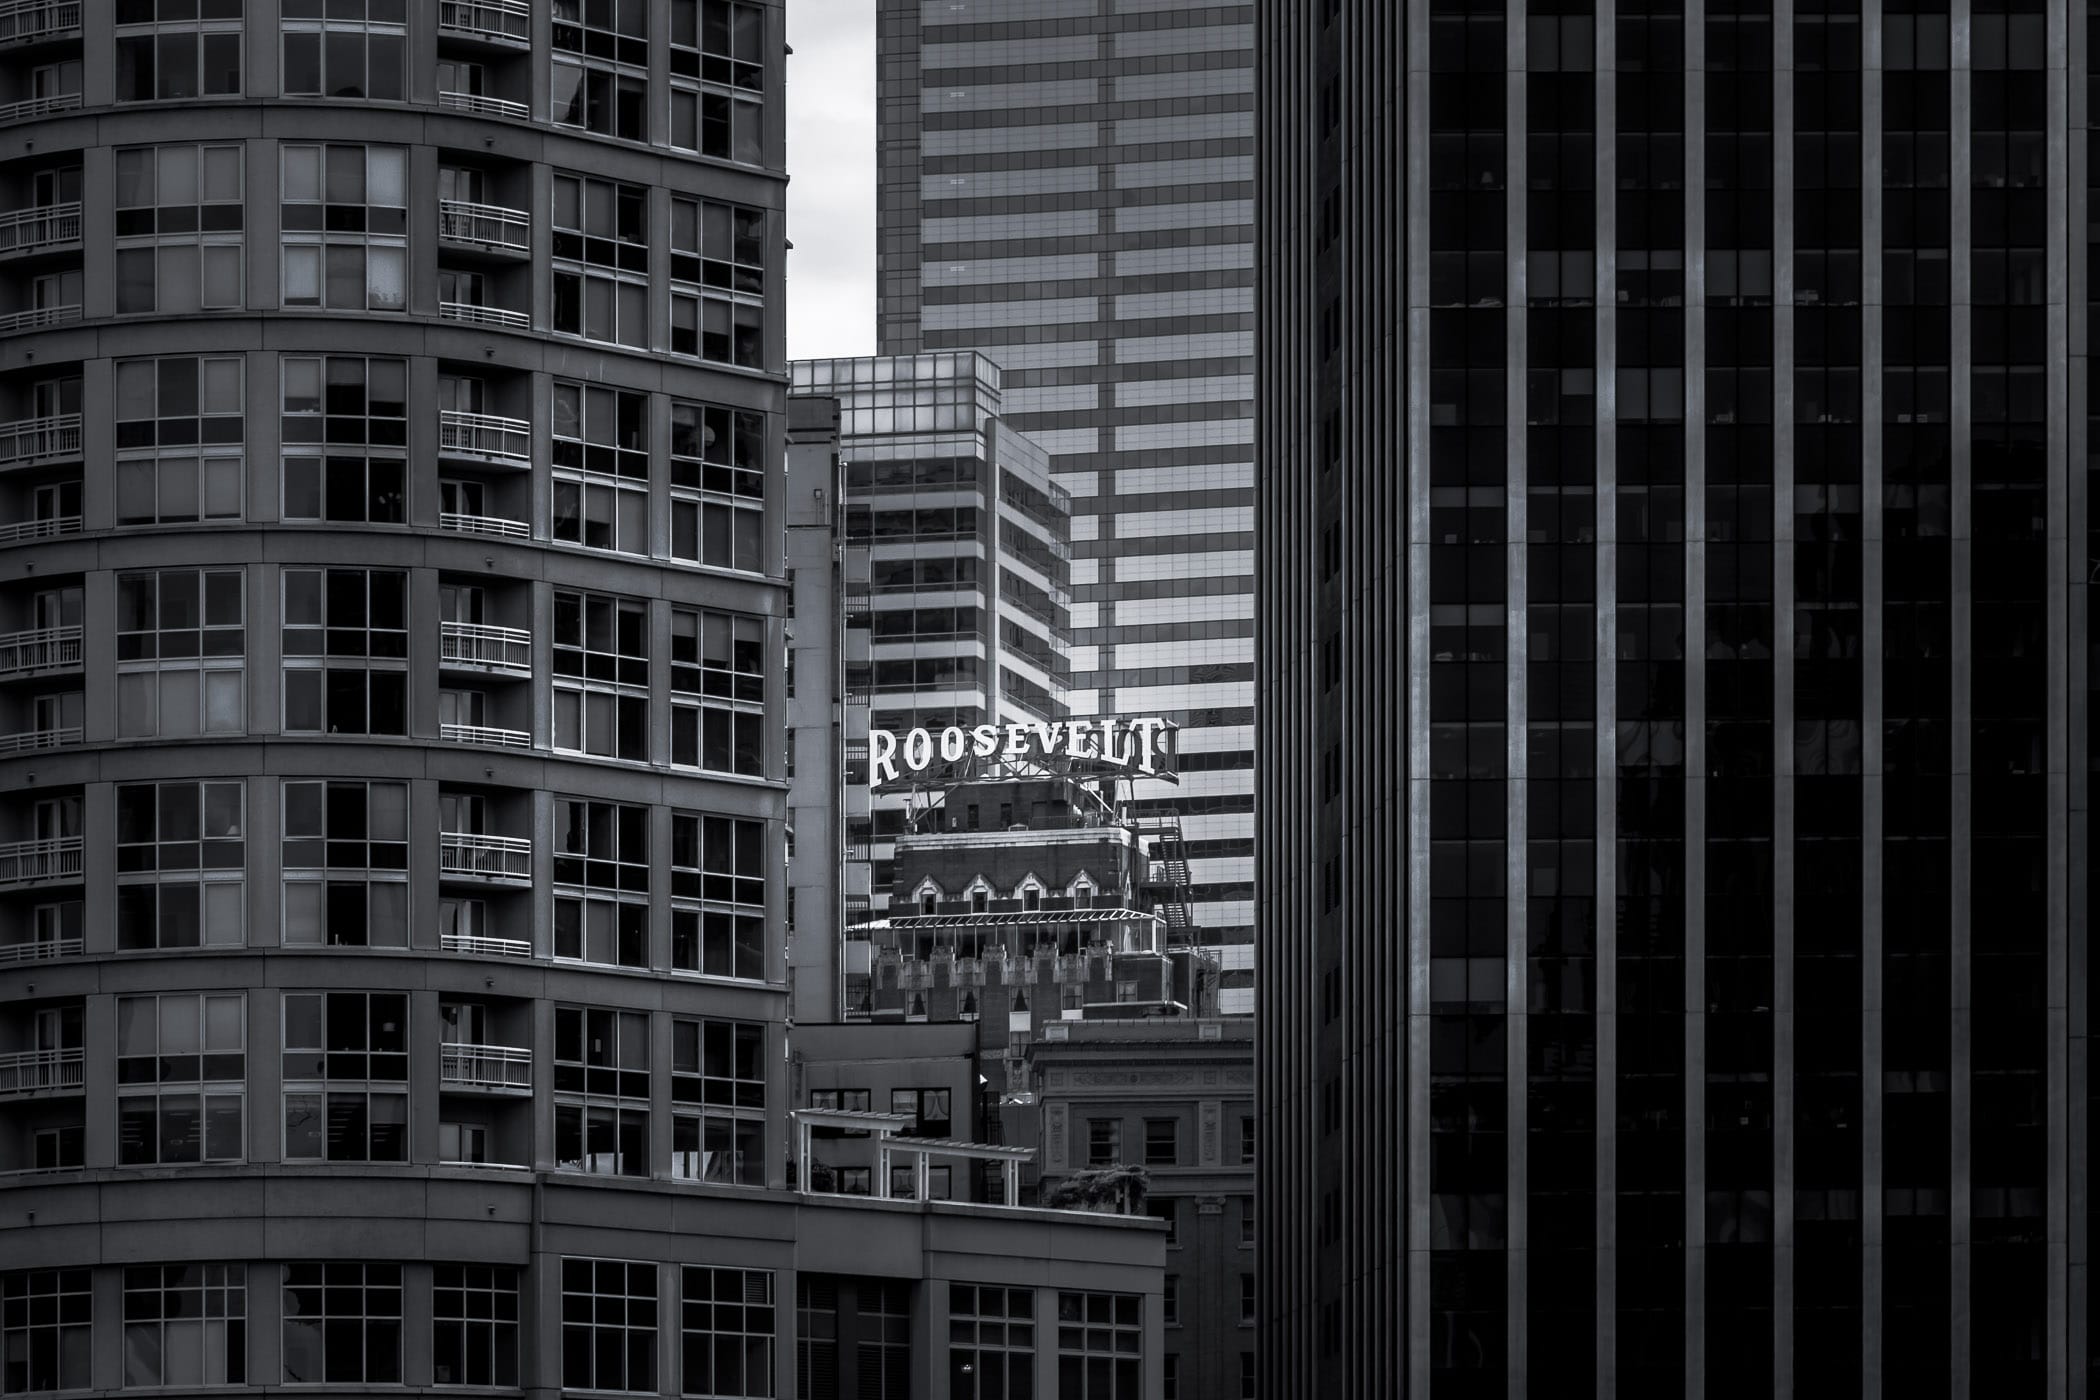 The rooftop sign of Seattle's Roosevelt Hotel peeks through the surrounding buildings.